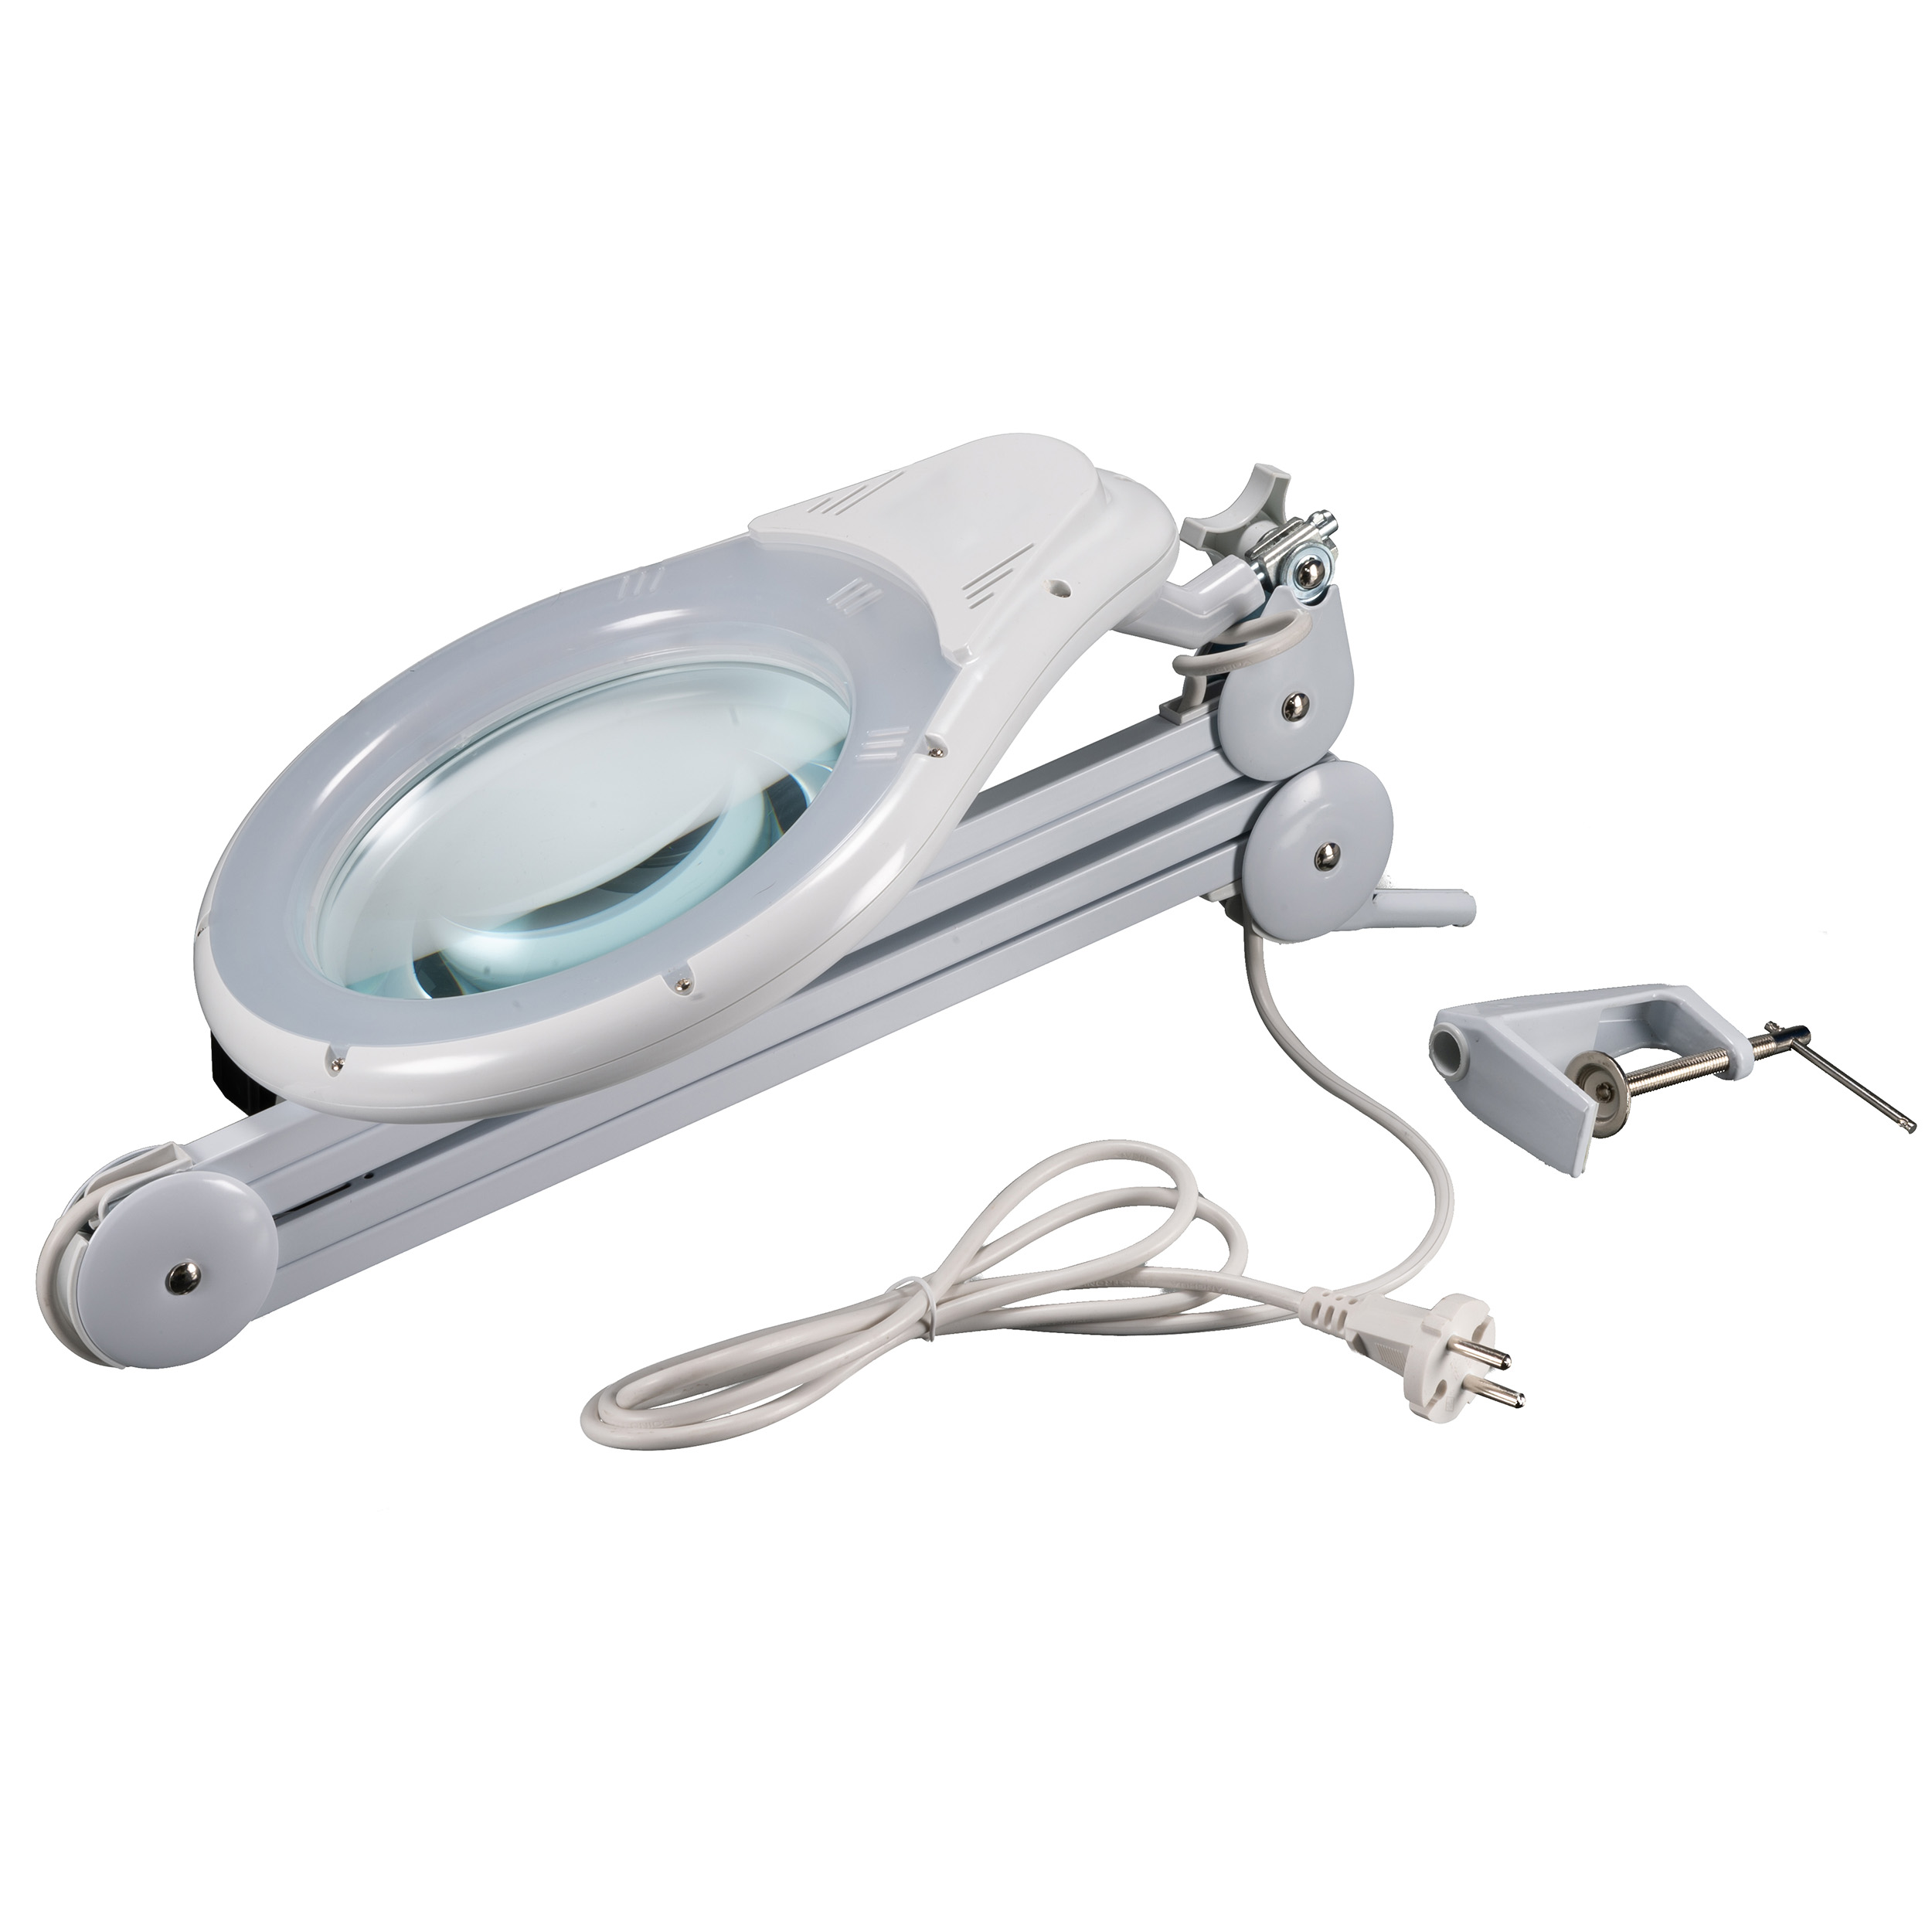 BRESSER LED Table Clamp Magnifier 2x 175mm